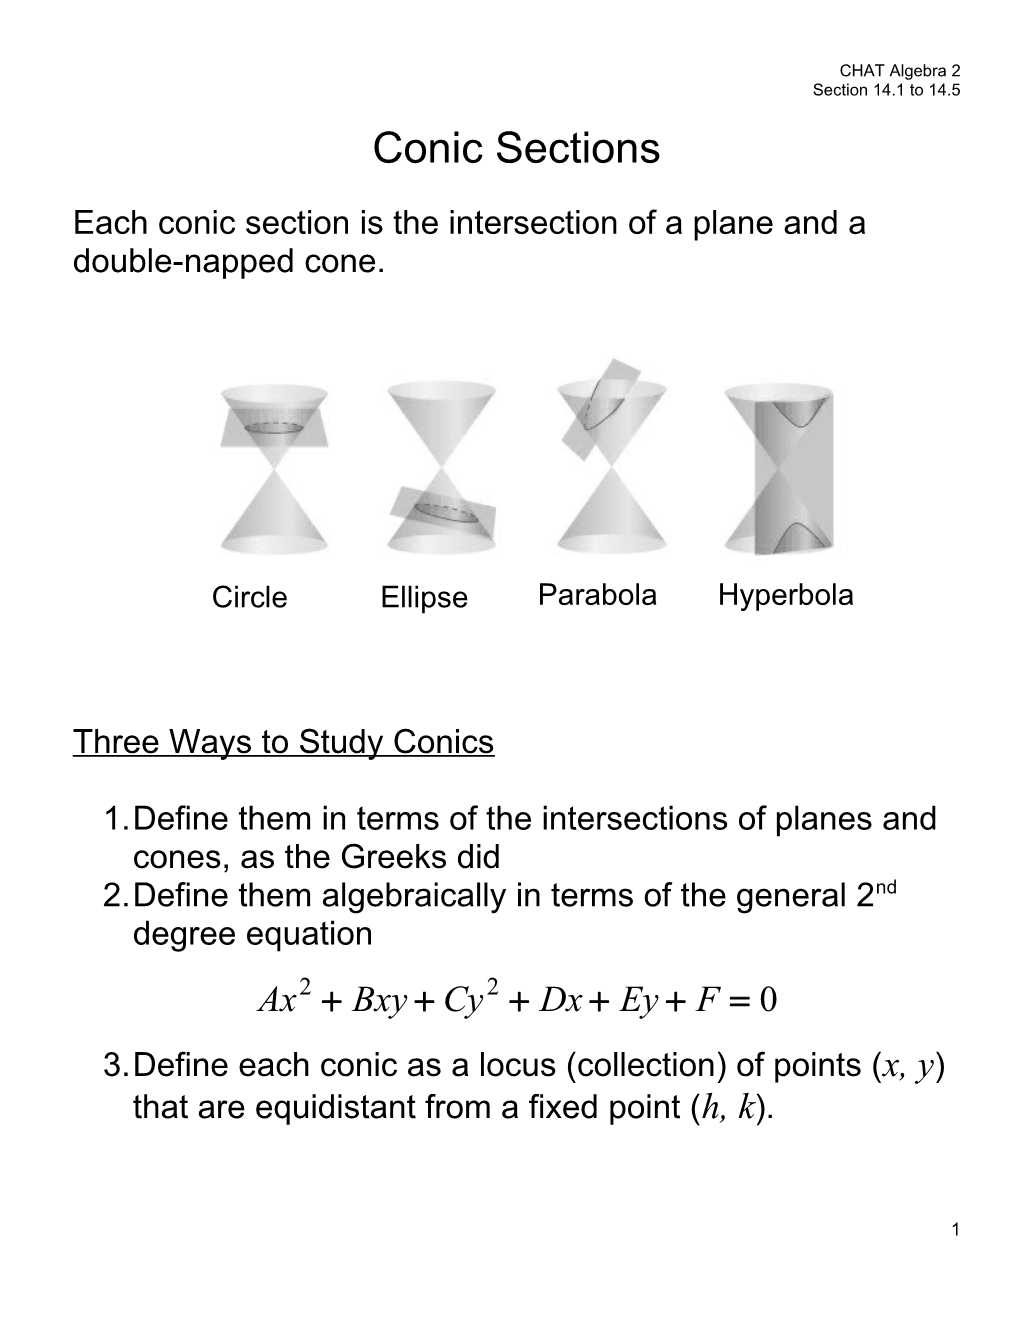 Each Conic Section Is the Intersection of a Plane and a Double-Napped Cone